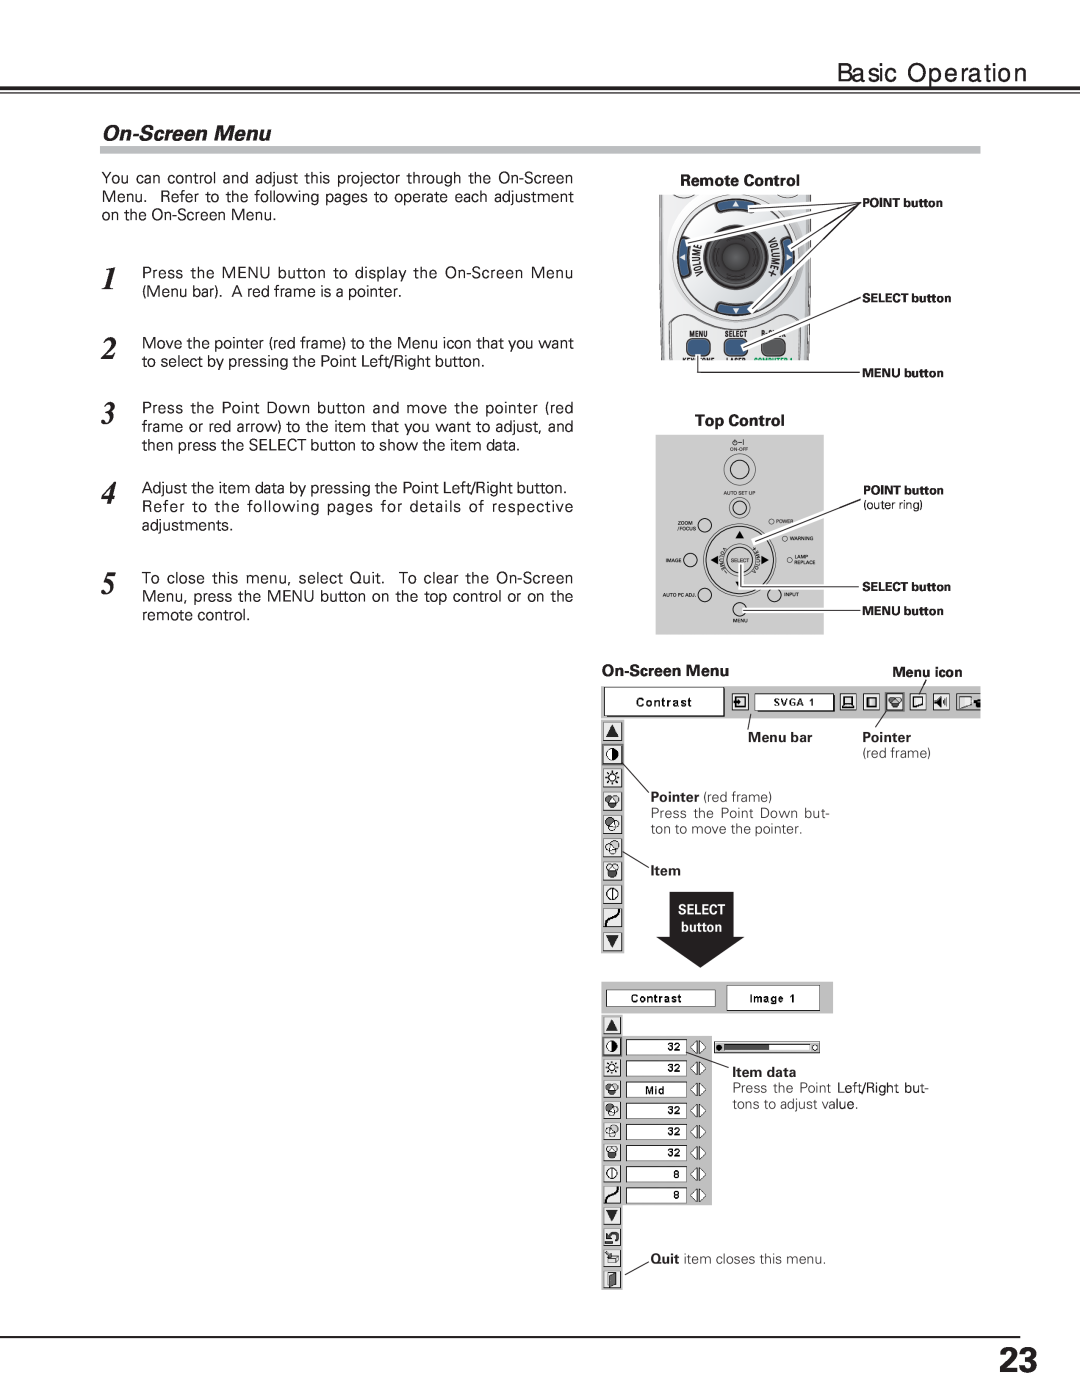 Eiki LC-XE10 instruction manual On-ScreenMenu, Basic Operation, Remote Control, Top Control 